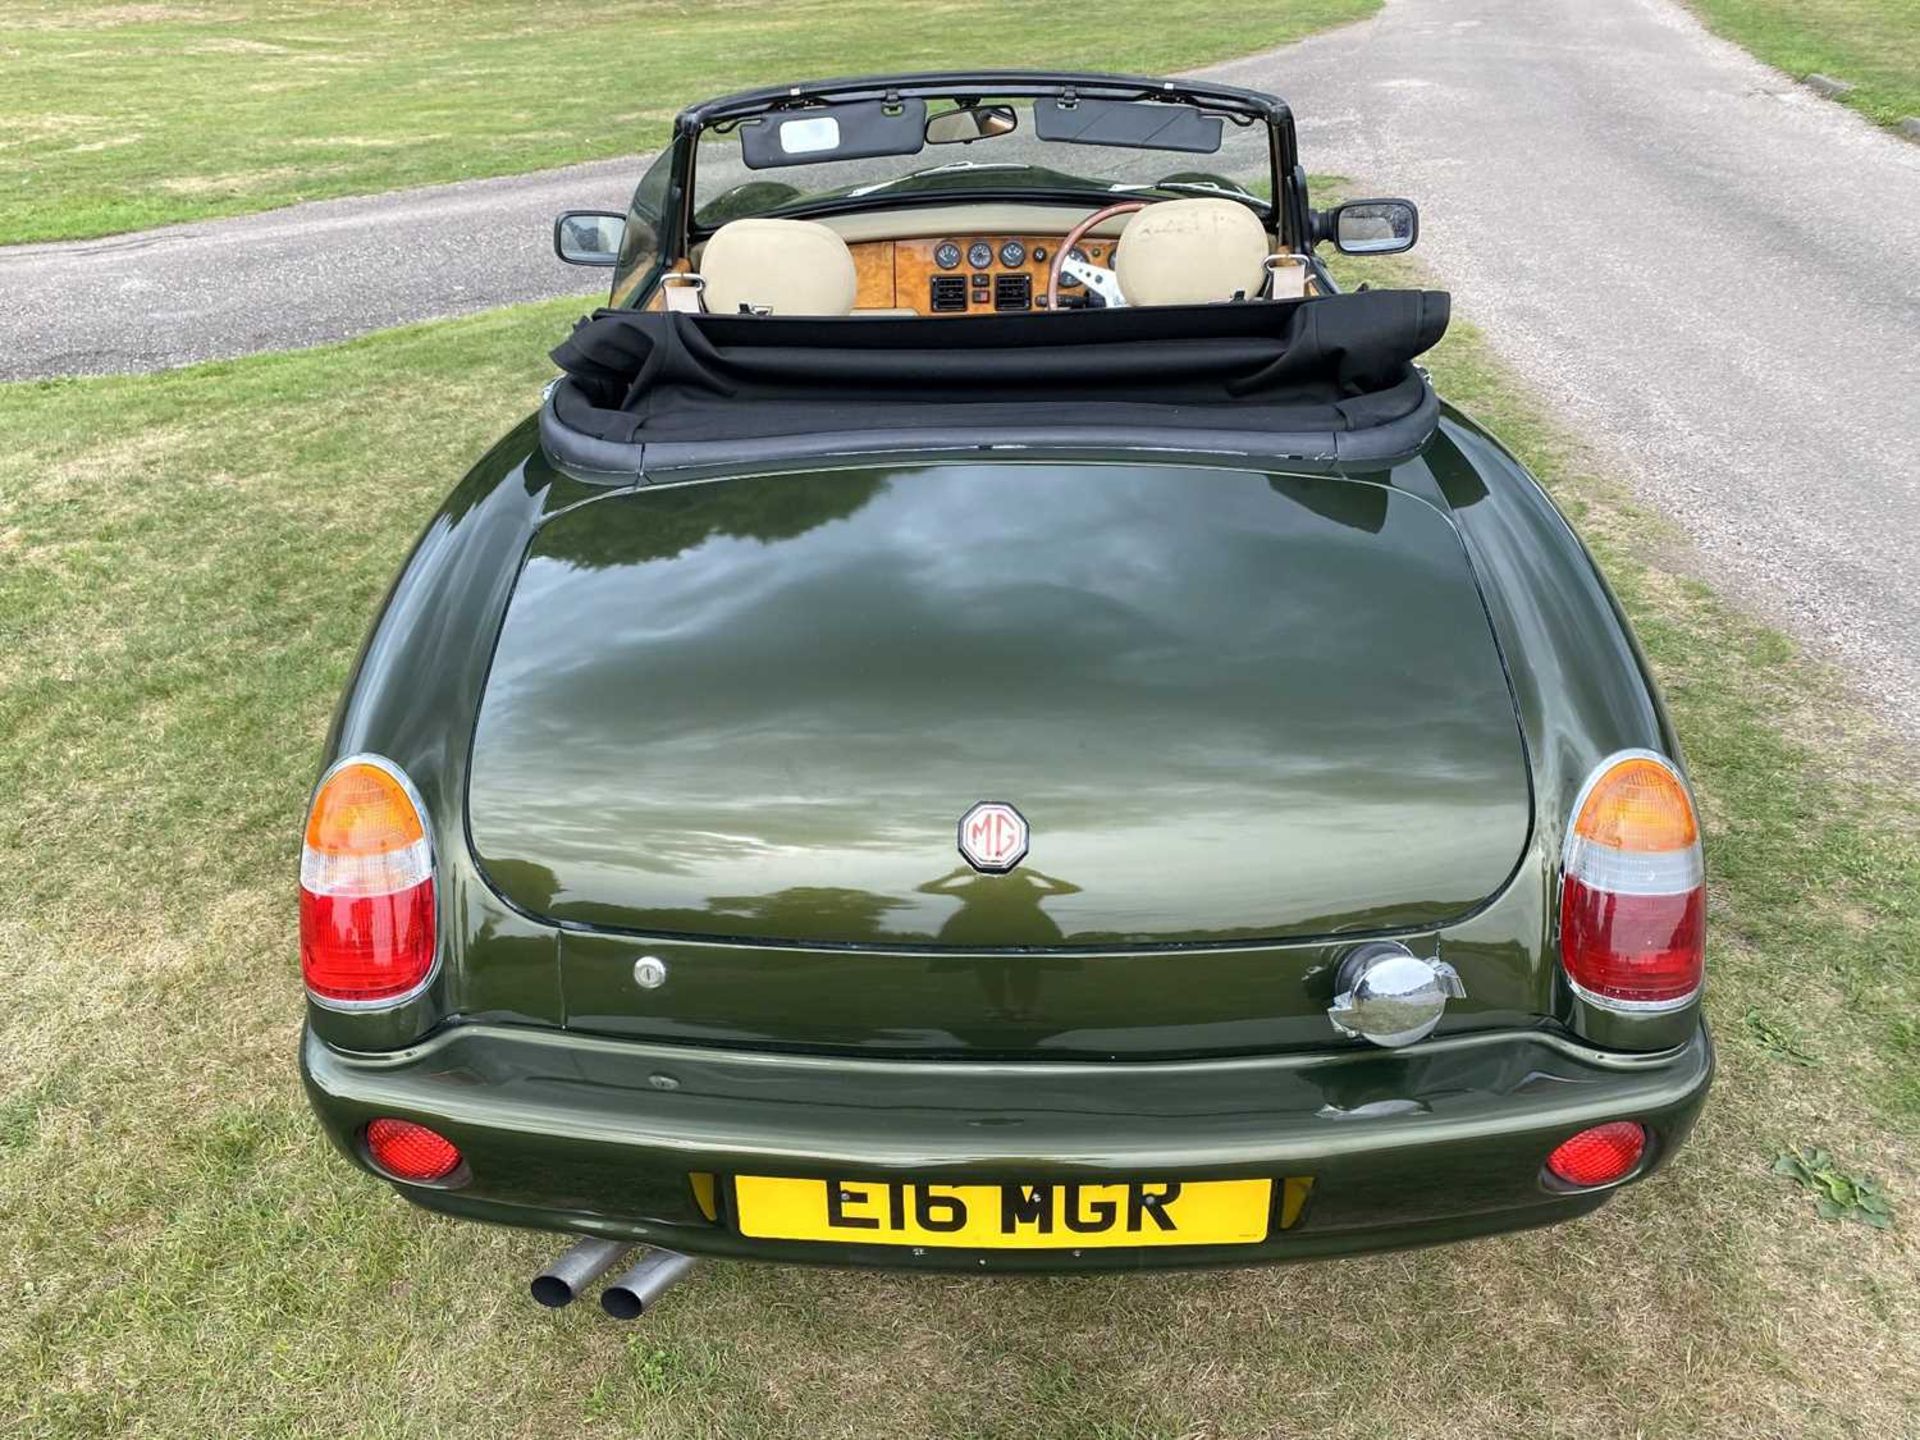 1995 MG RV8 A rare and sought-after car fitted with power steering - Image 16 of 45